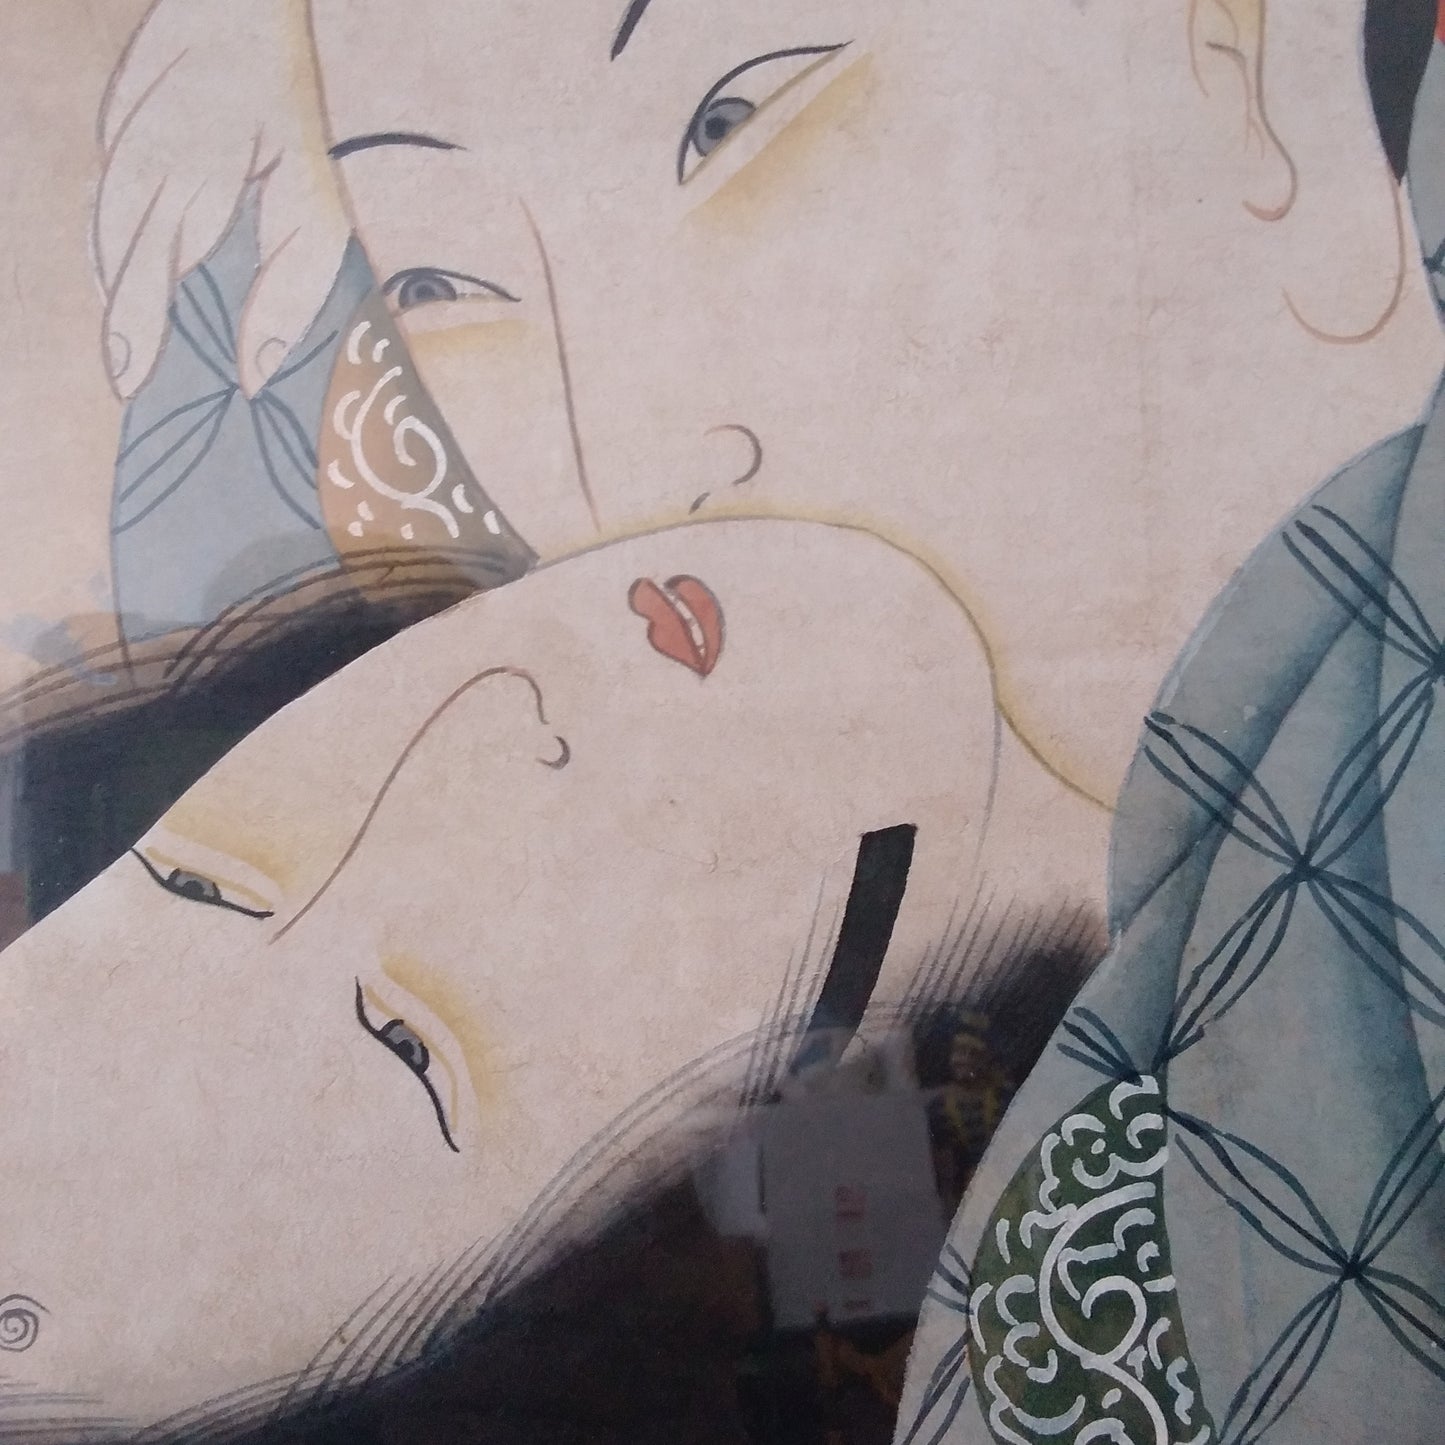 Asian Art - Man and Woman Embracing - Stamped